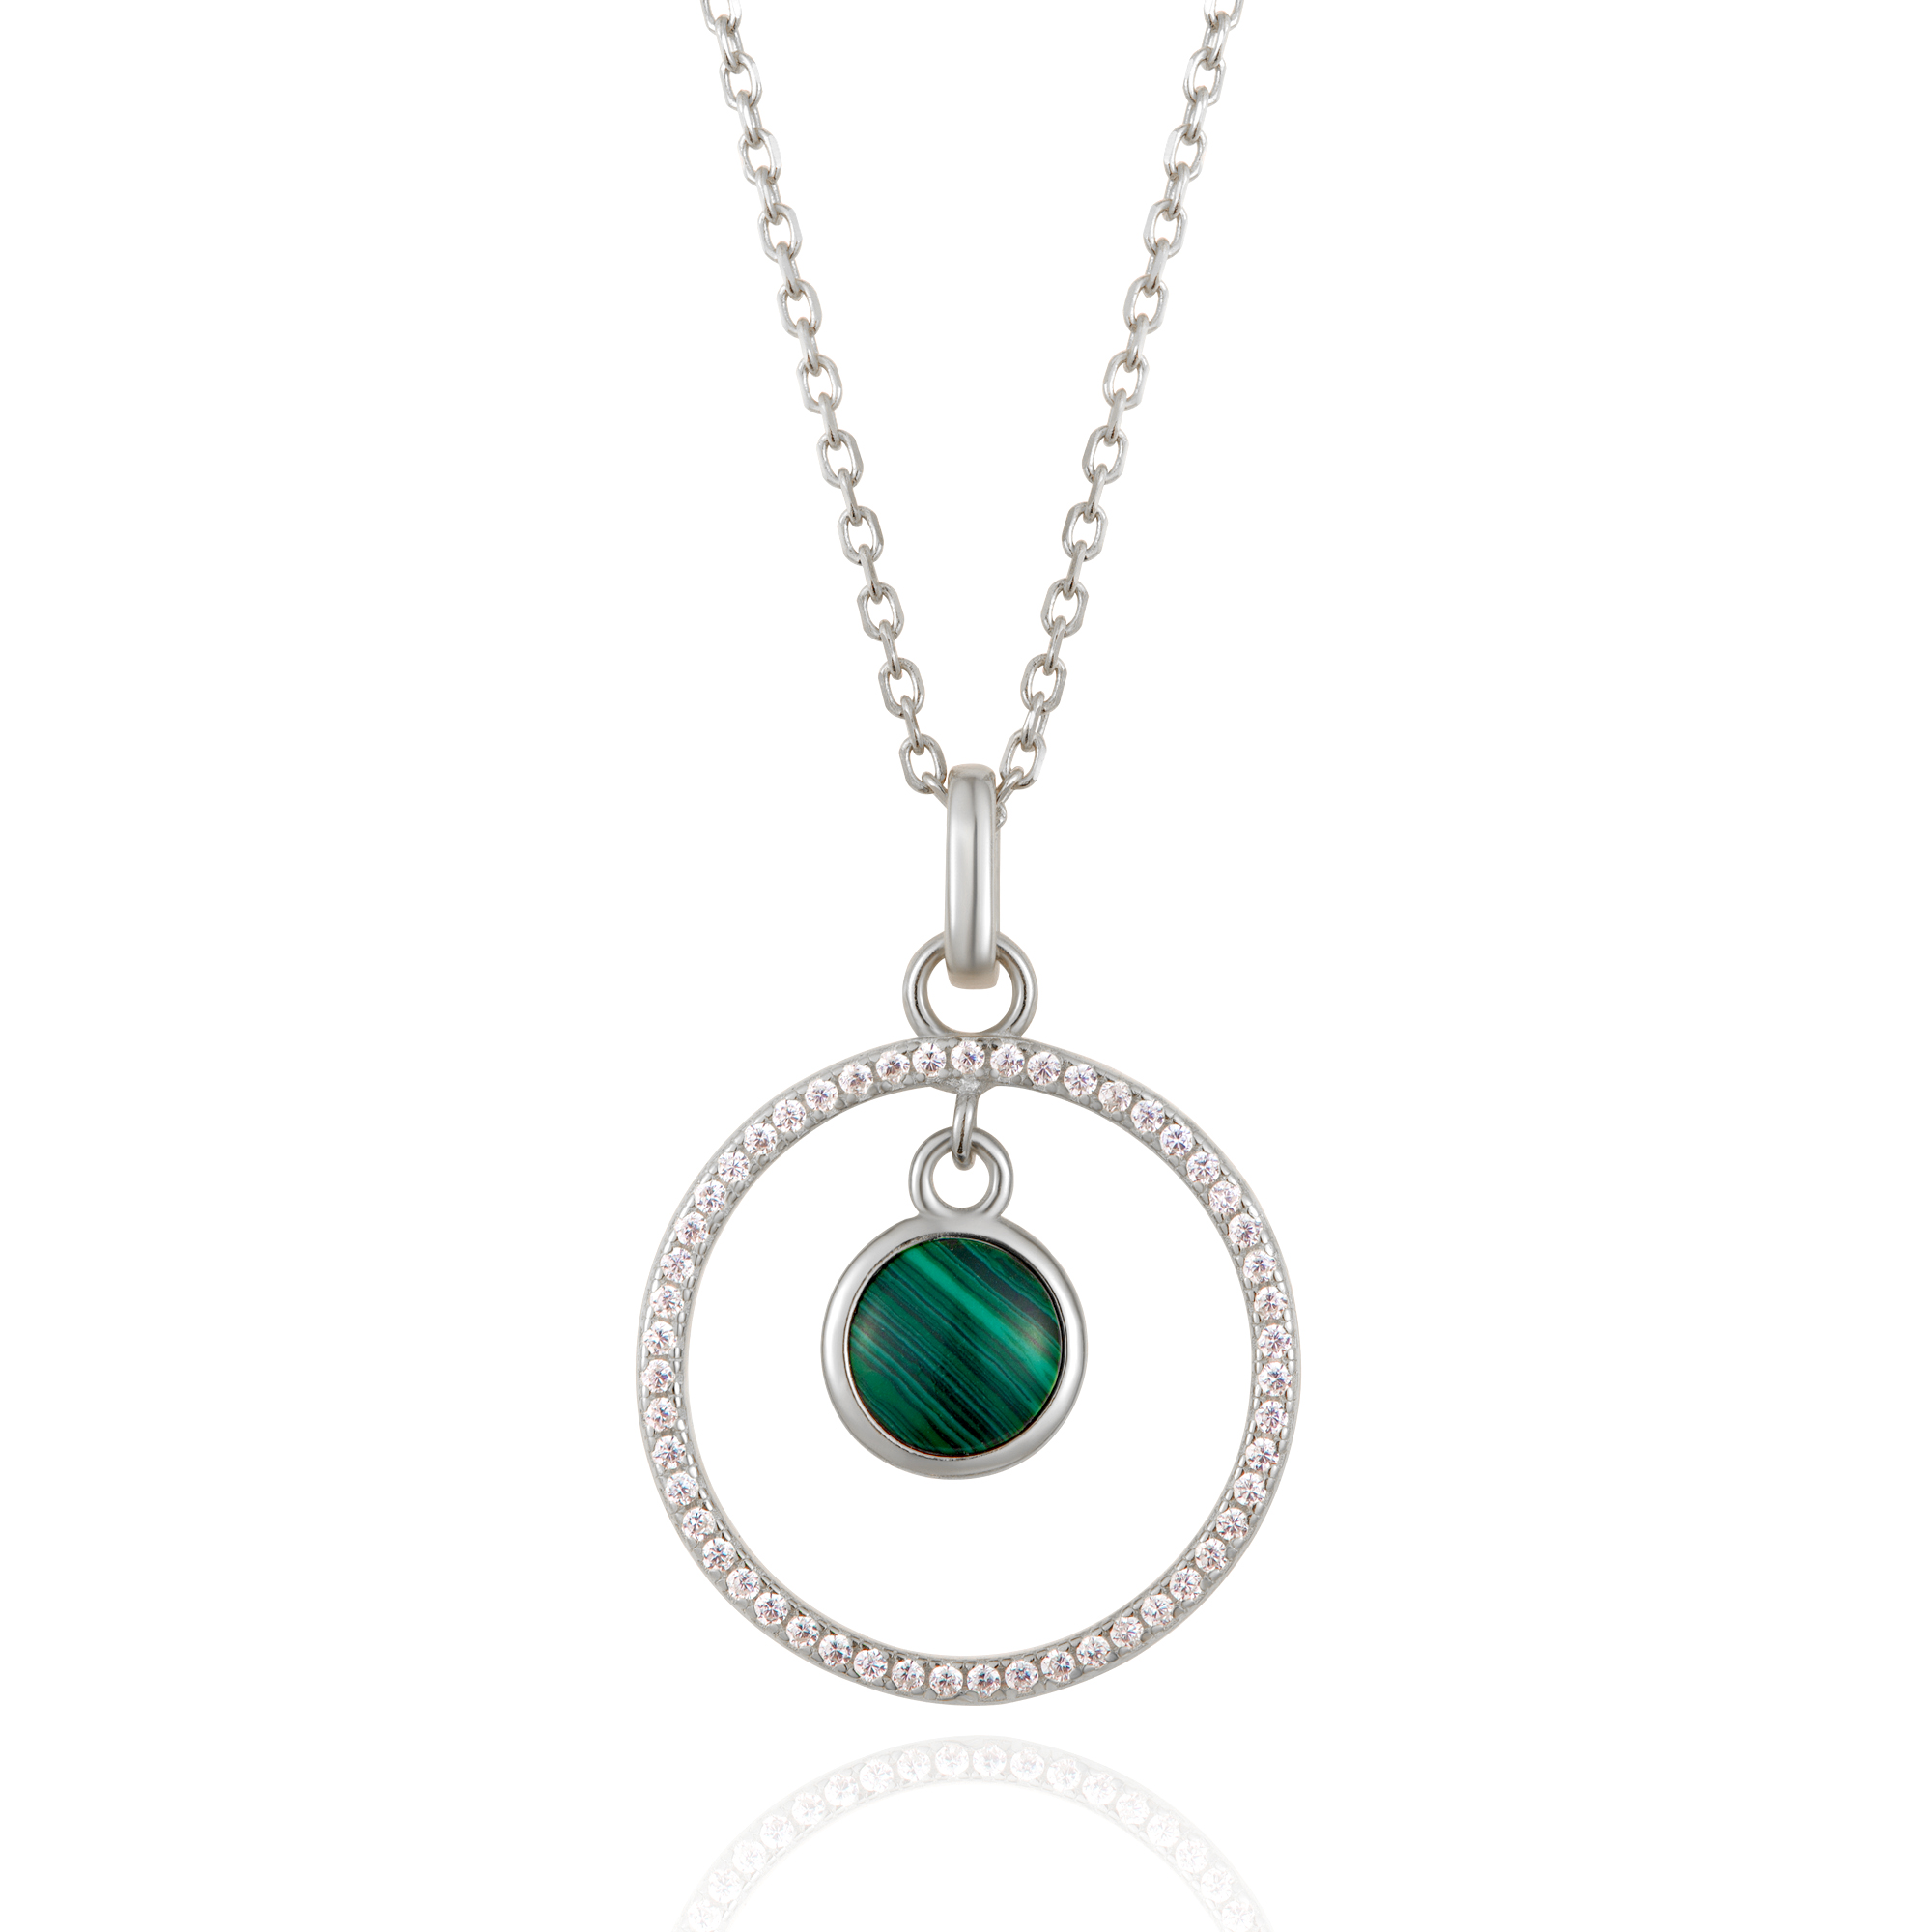 Pricelist For Twist Stick Pendant Necklace - Sterling Silver Green Cz Cubic Zircon Circle Pendant Necklace – XH&SILVER